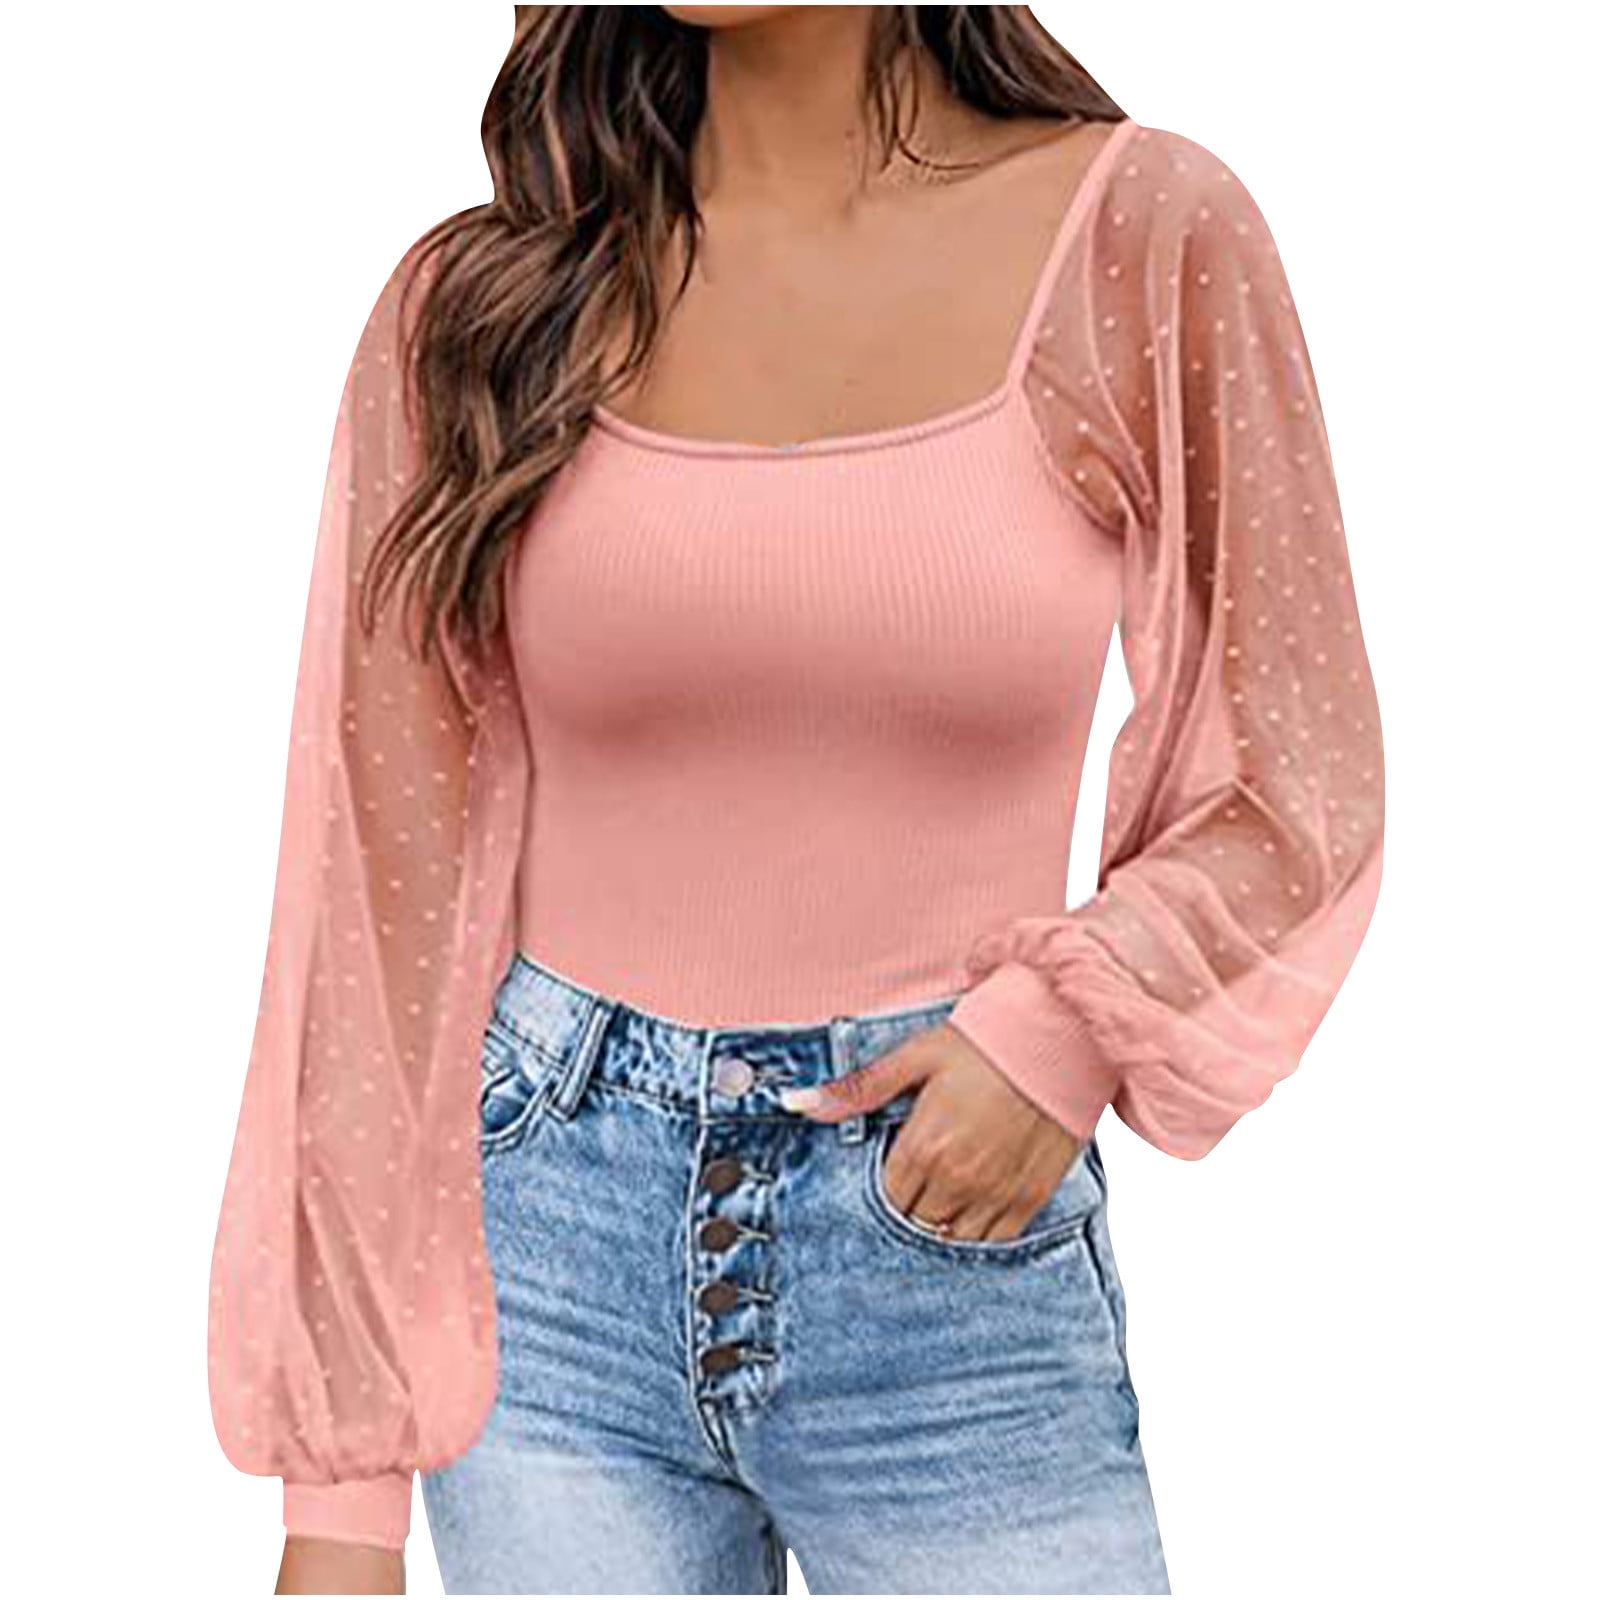 Lure te Vie Trendy Casual Going Out Tops for Women Summer Sheer Mesh Lace Long Sleeve  Shirts Solid Color Plain T-shirts Blouse - Walmart.com